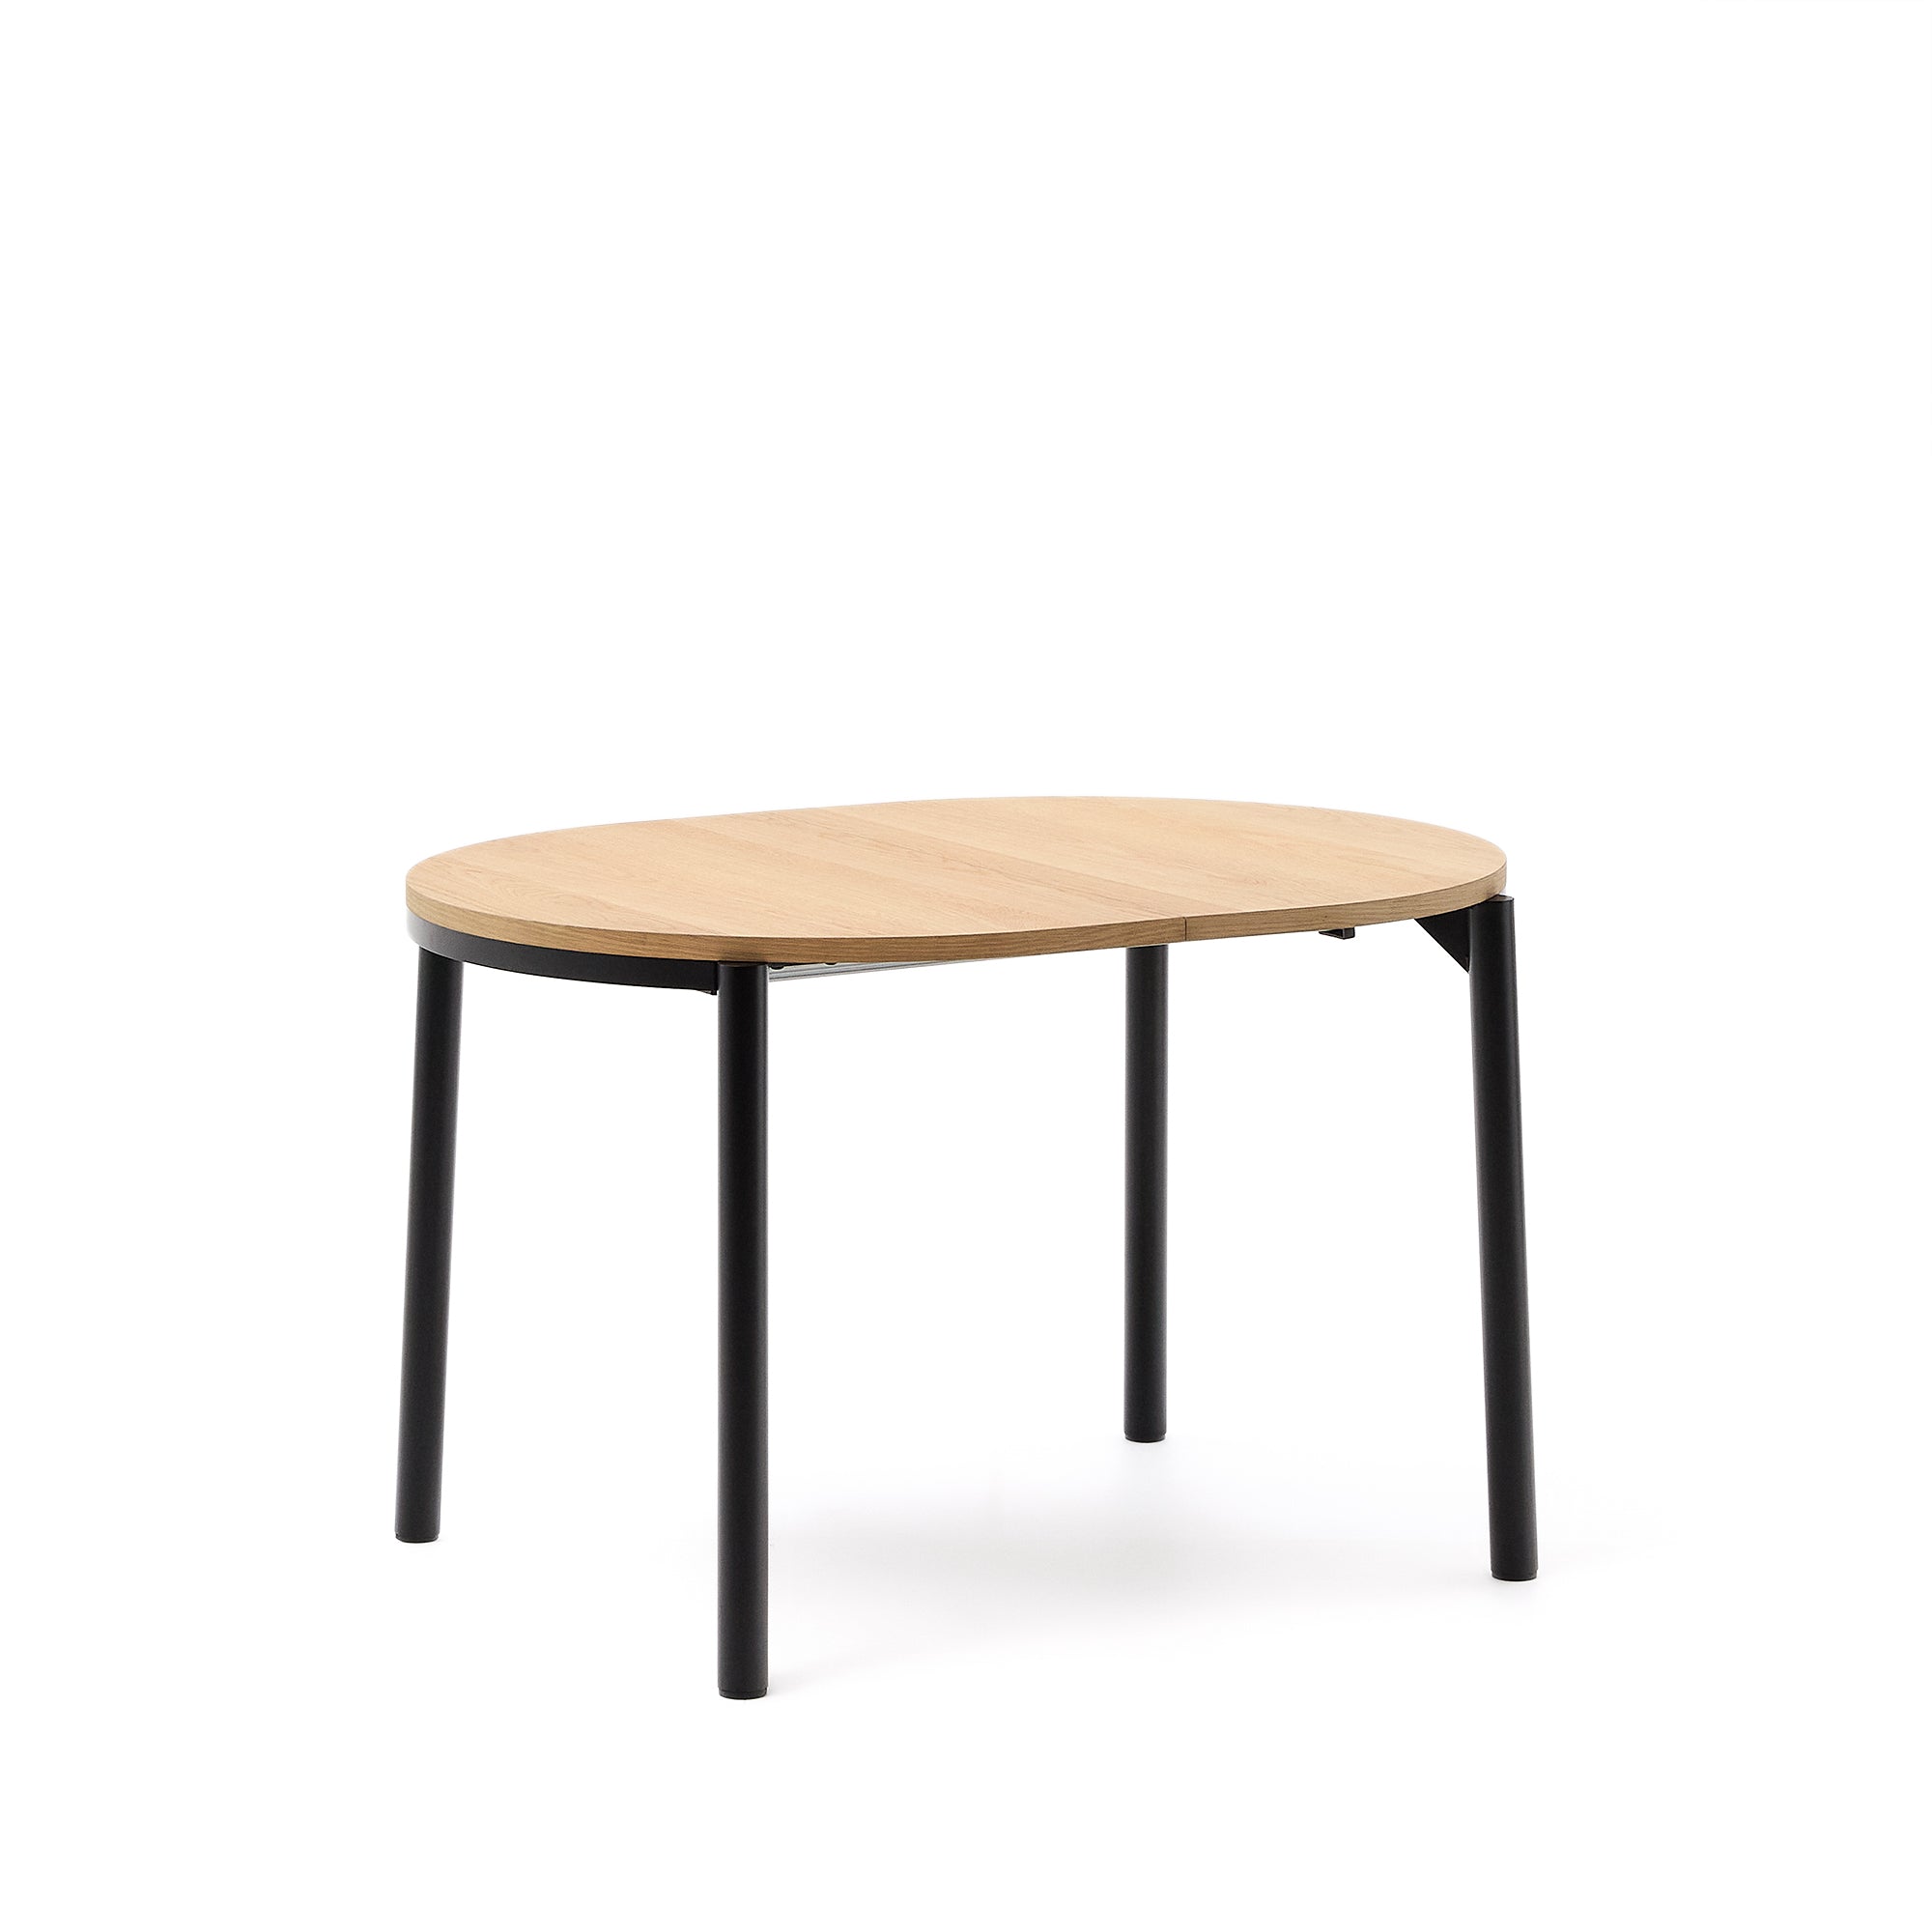 Montuiri round extendable table with oak veneer and black finished steel legs, Ø120(160) x 90 cm